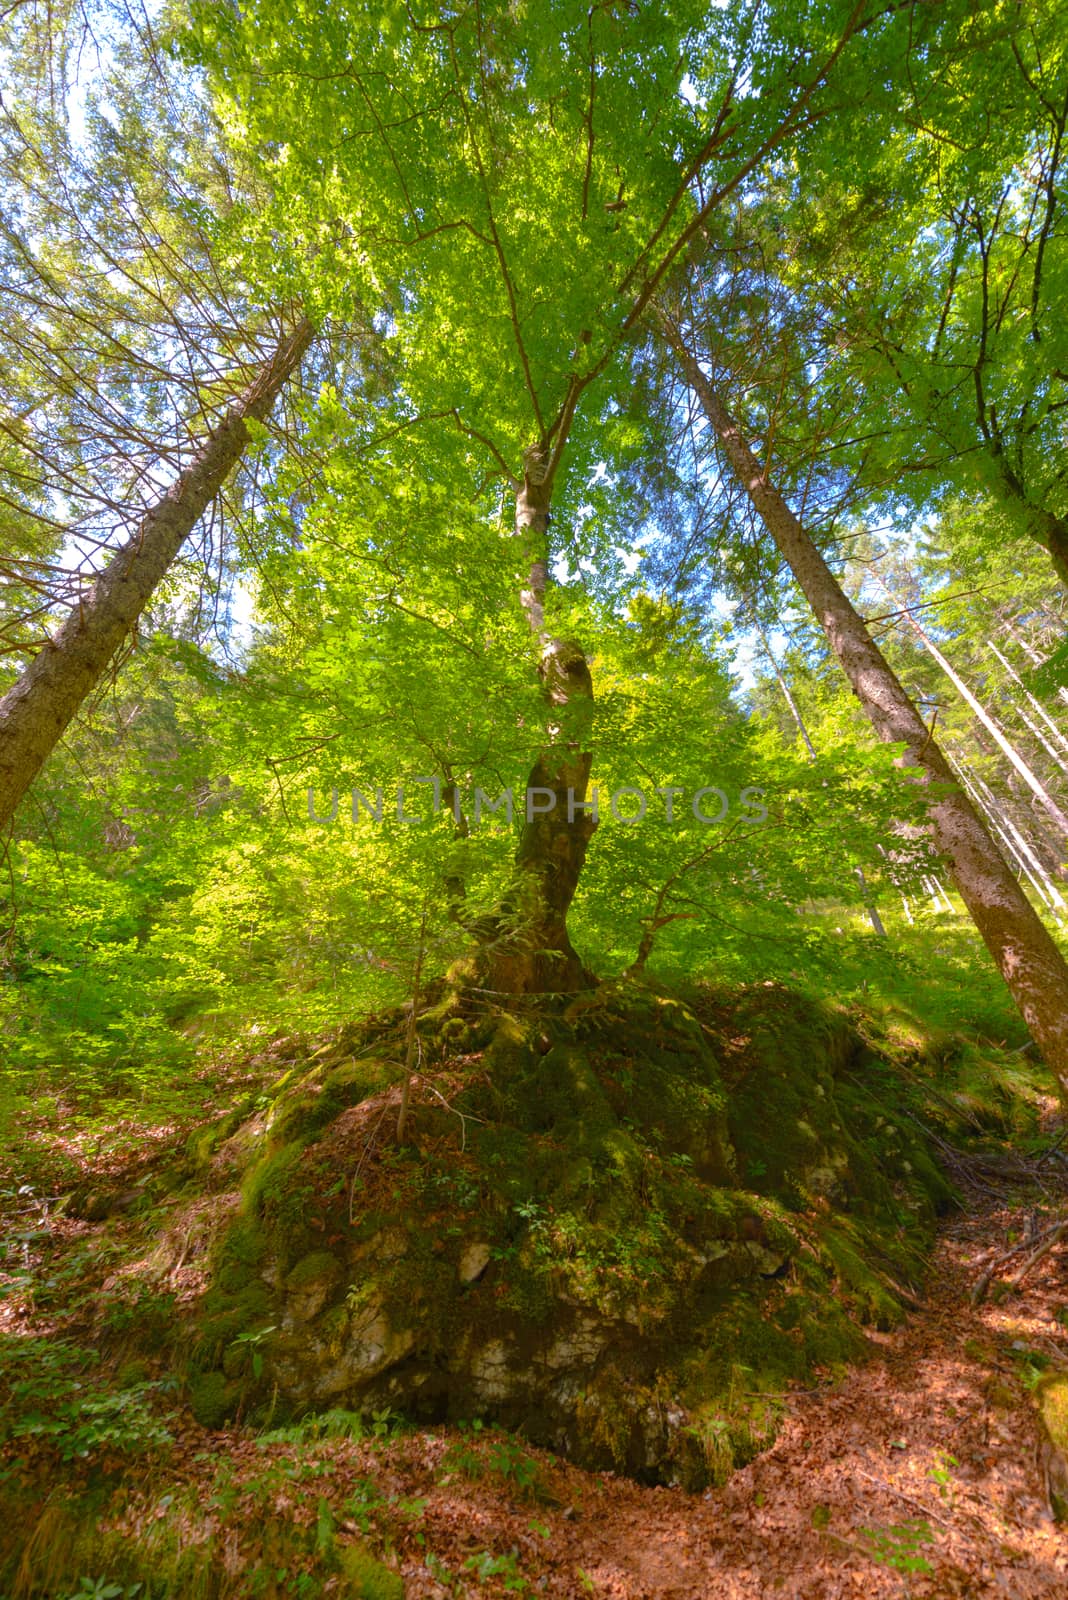 Trees in a forest from below, low angle perspective, wide angle lens